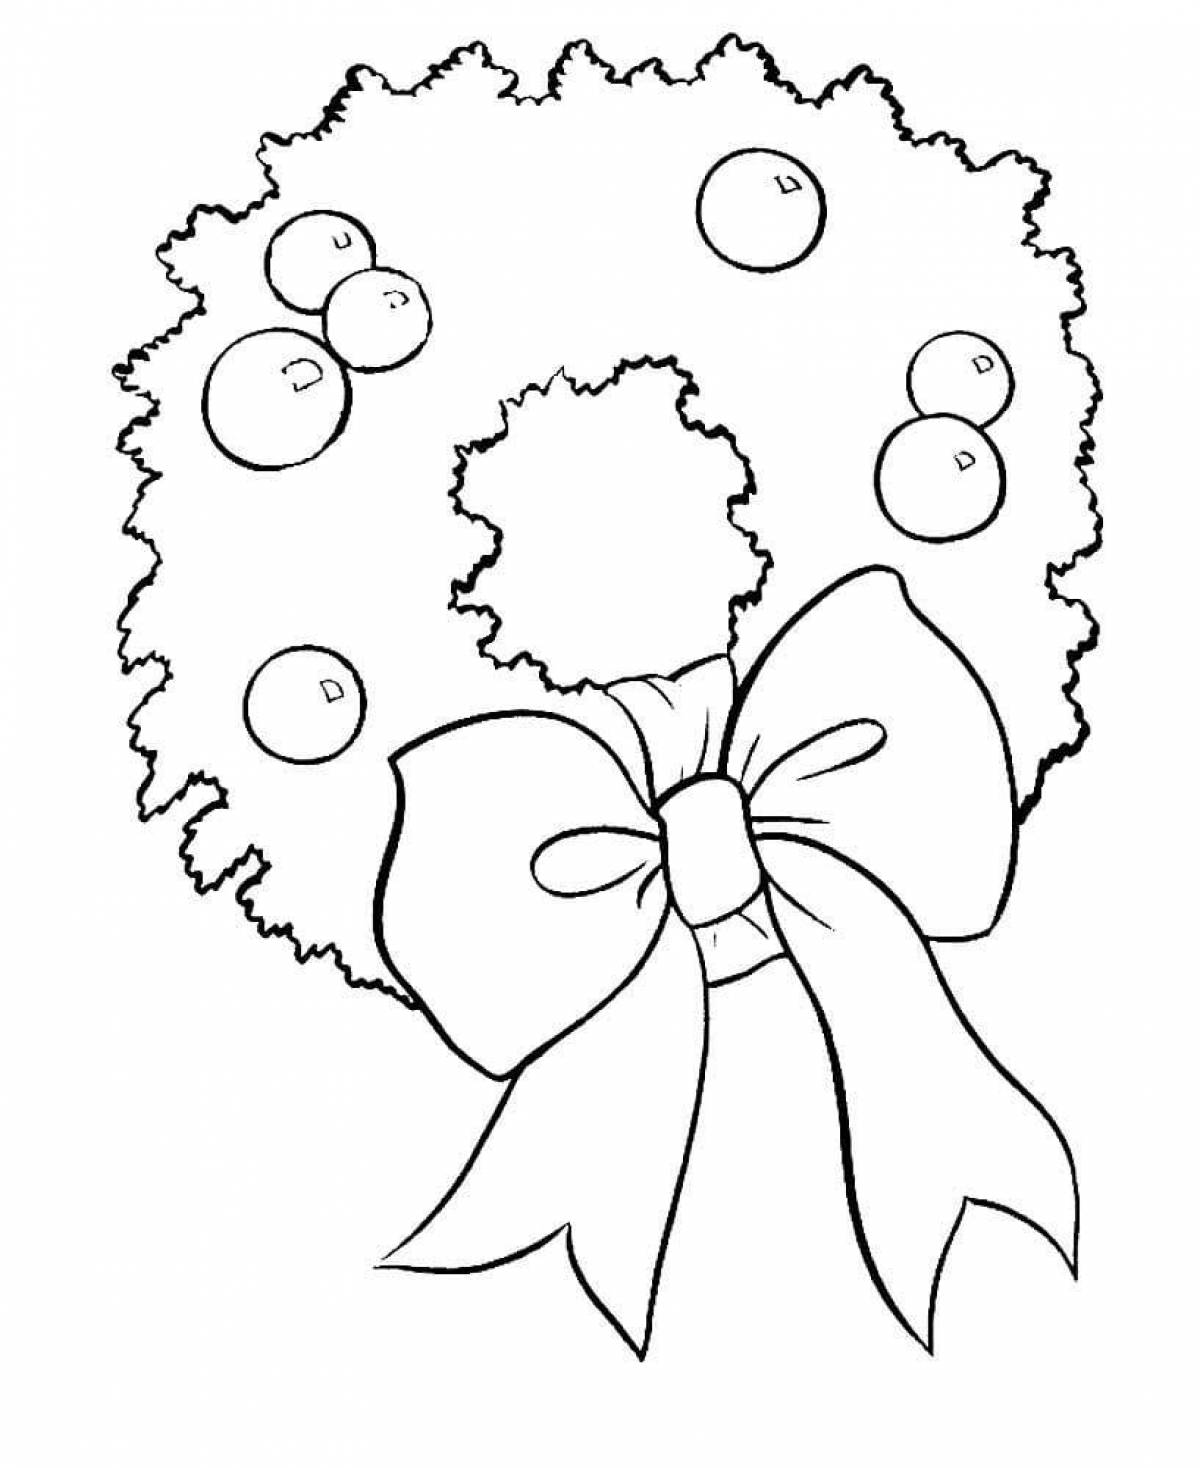 Coloring page beautiful Christmas wreath